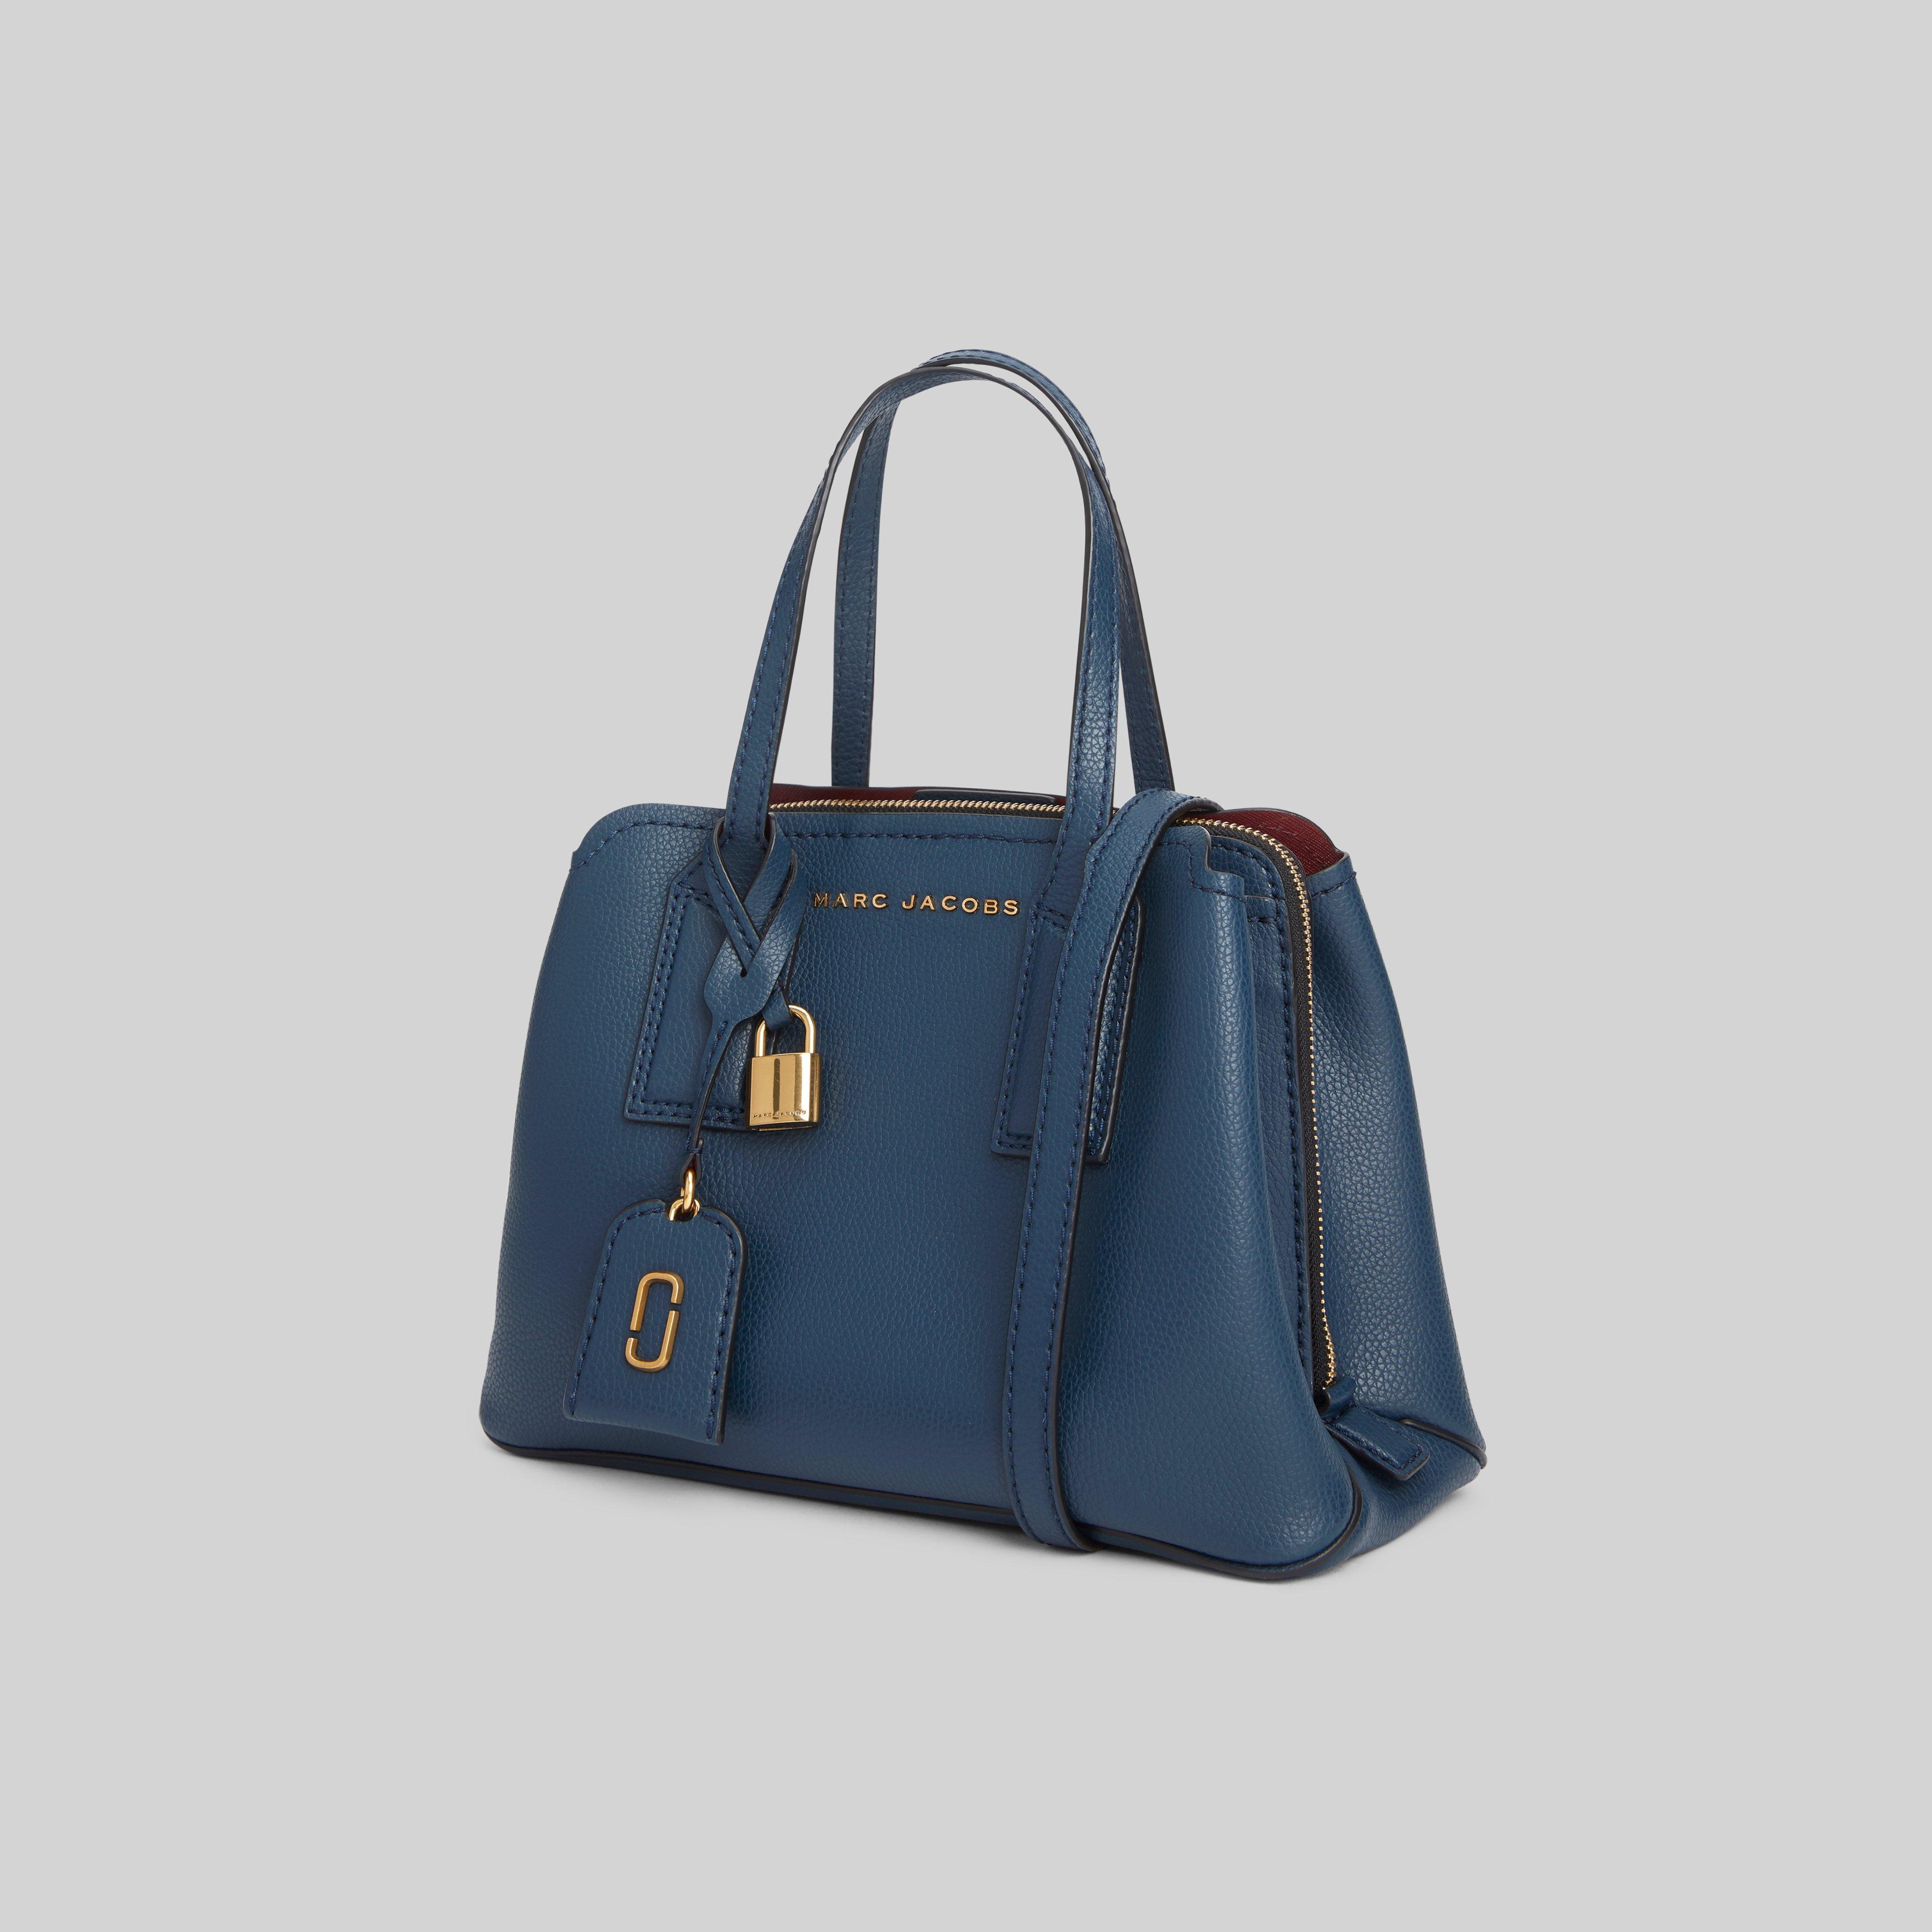 Marc Jacobs The Editor 29 Leather Satchel in Blue,Gold Tone (Blue) - Lyst